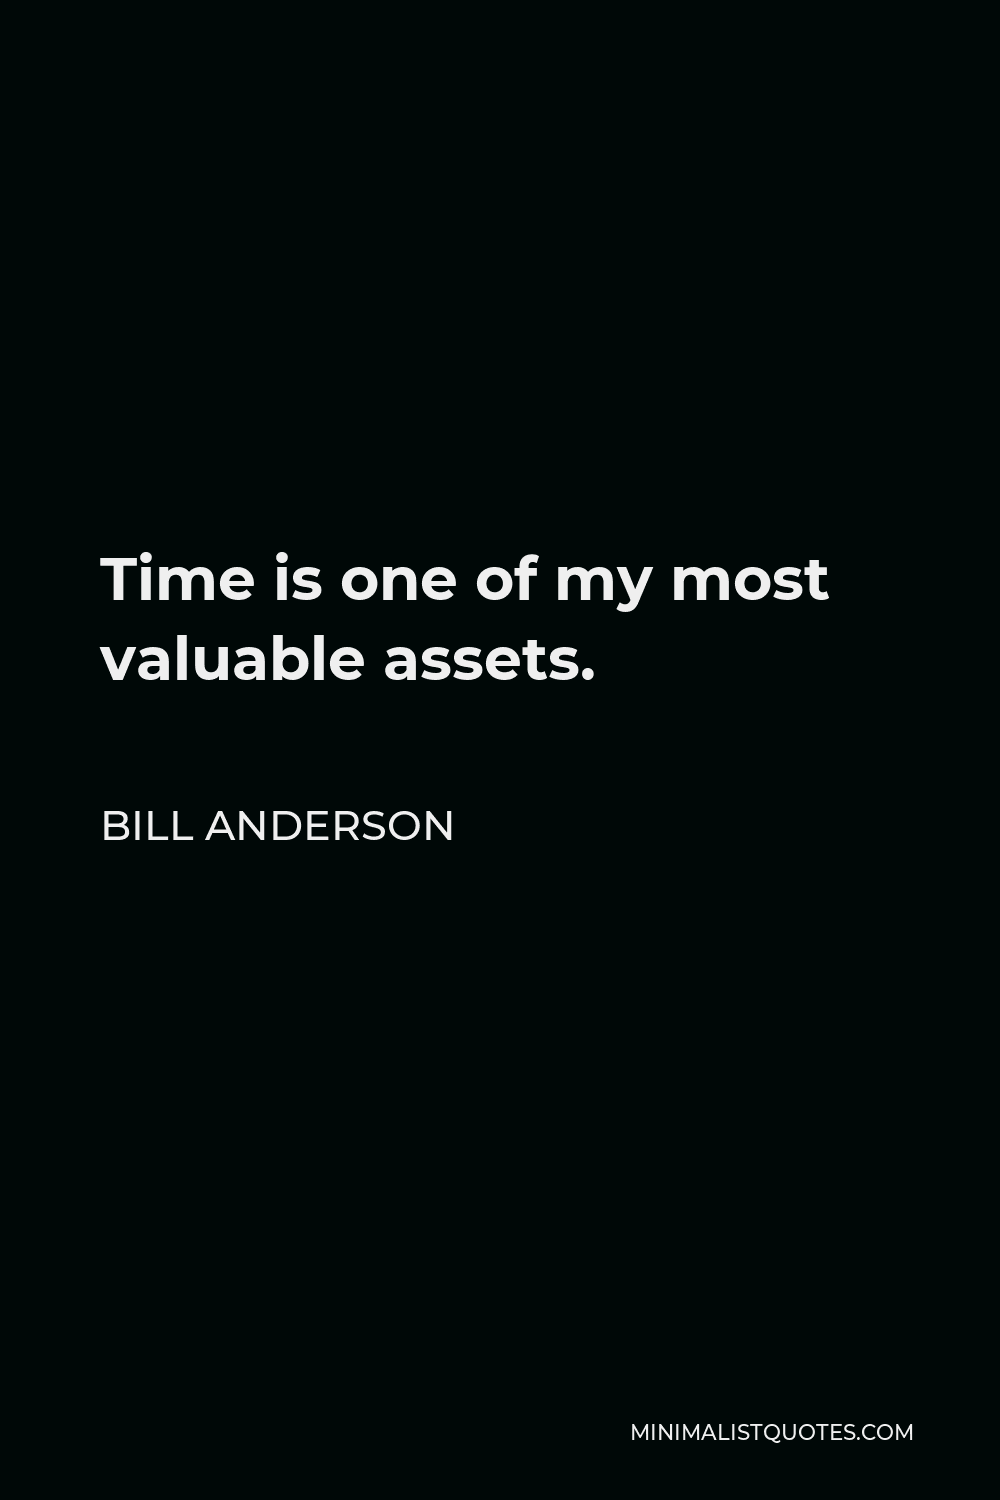 Bill Anderson Quote - Time is one of my most valuable assets.